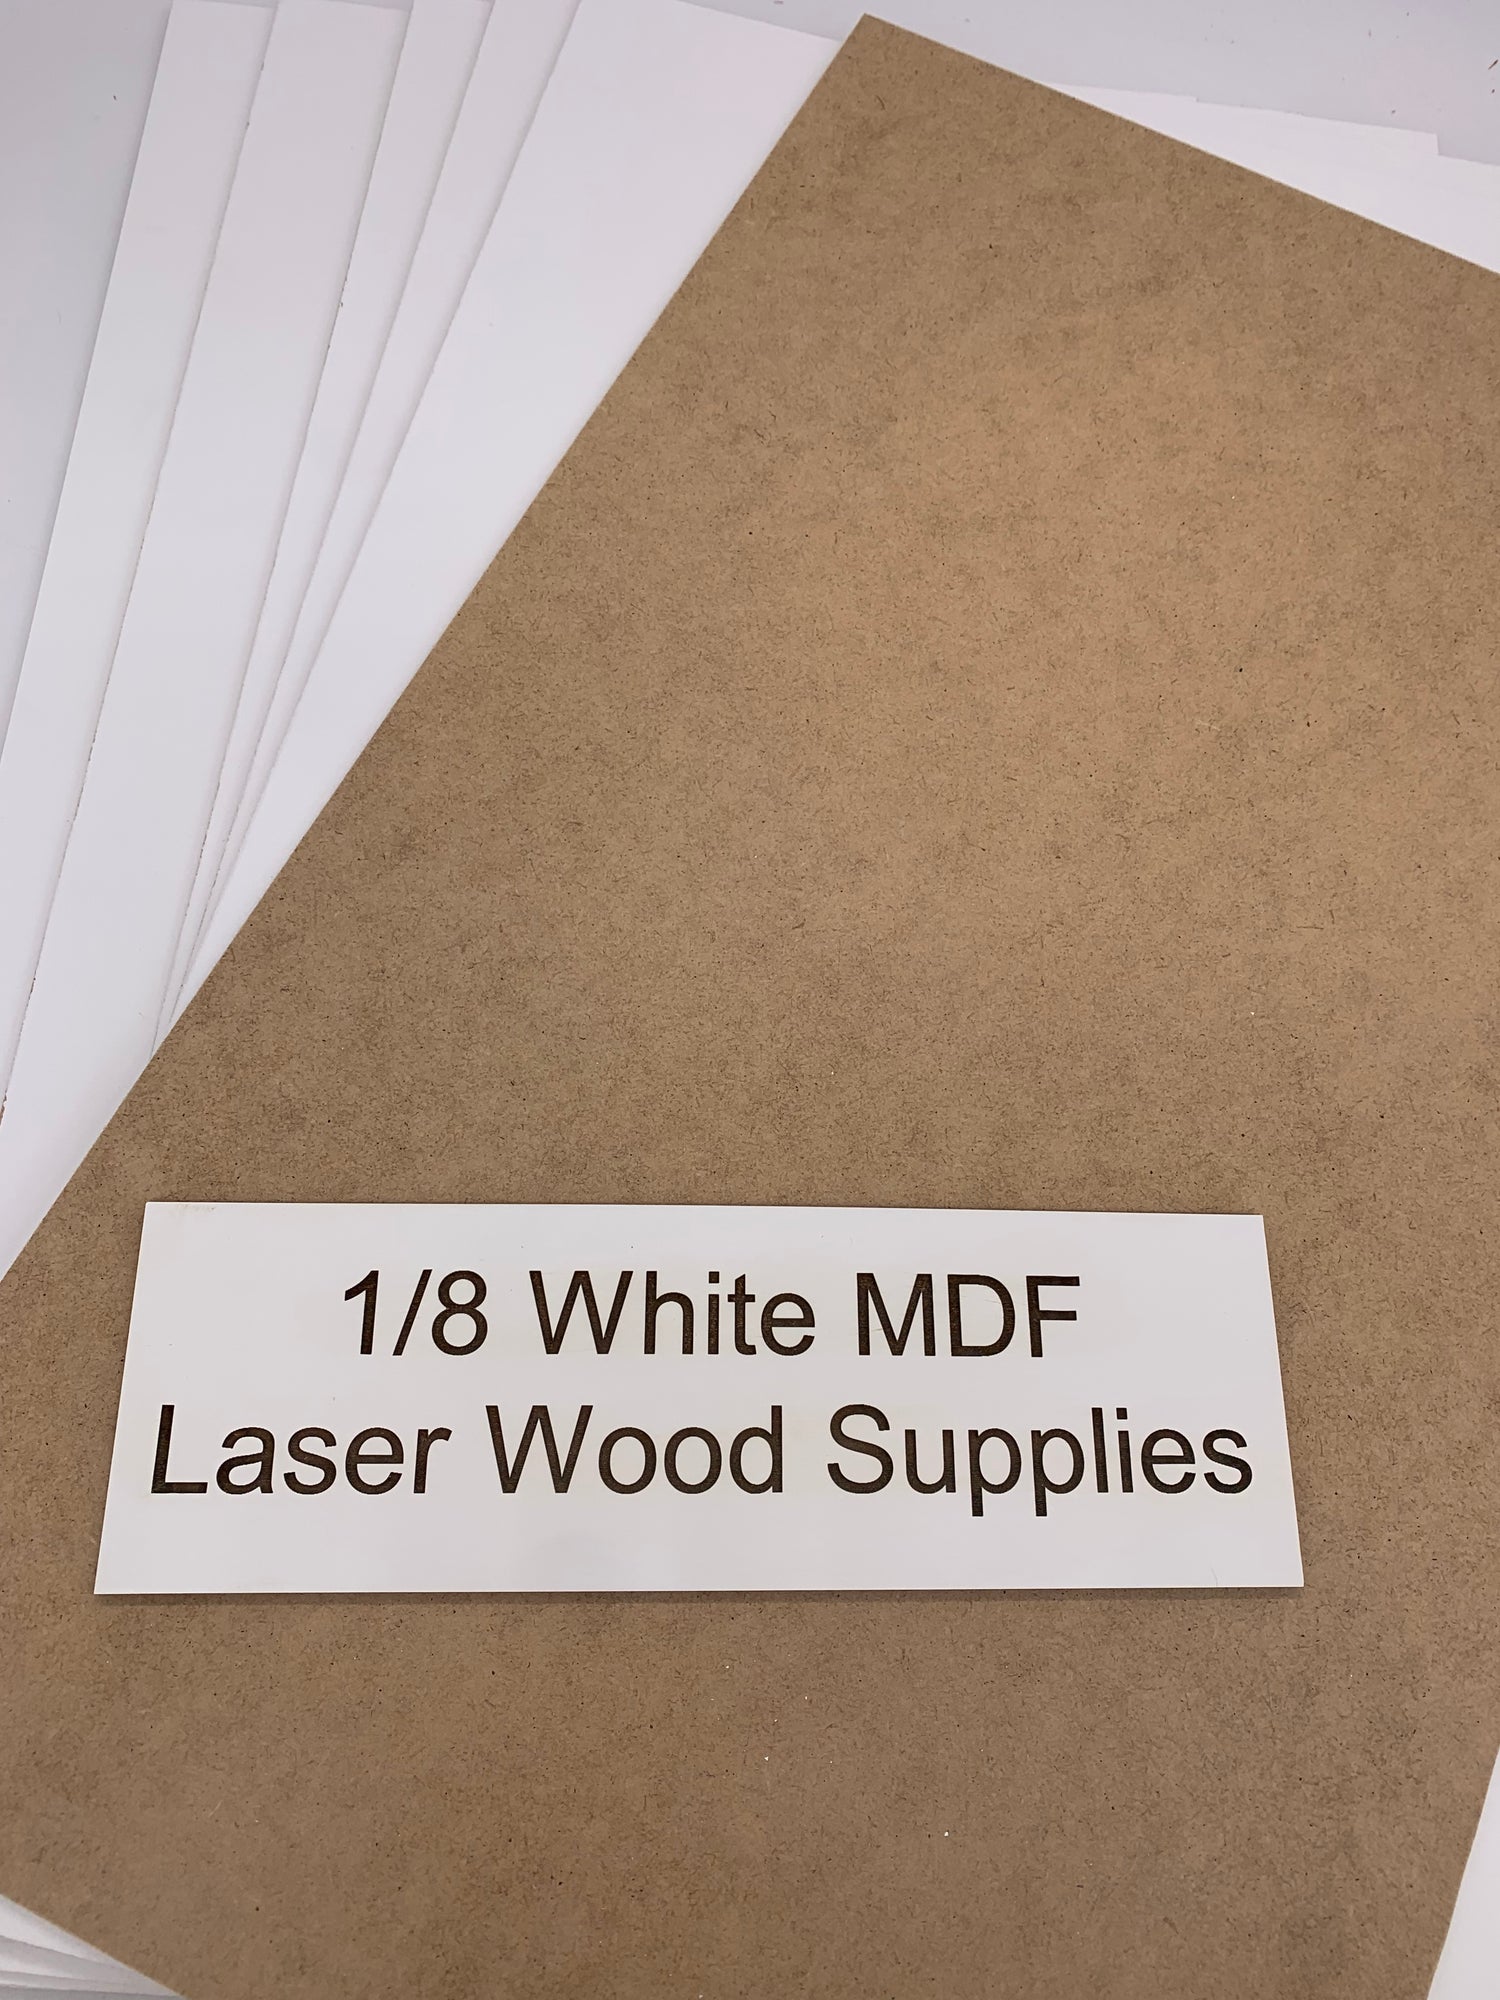 1/8 White MDF Laser Cutter's Bulk Pack 12x20 - Woodworkers Source